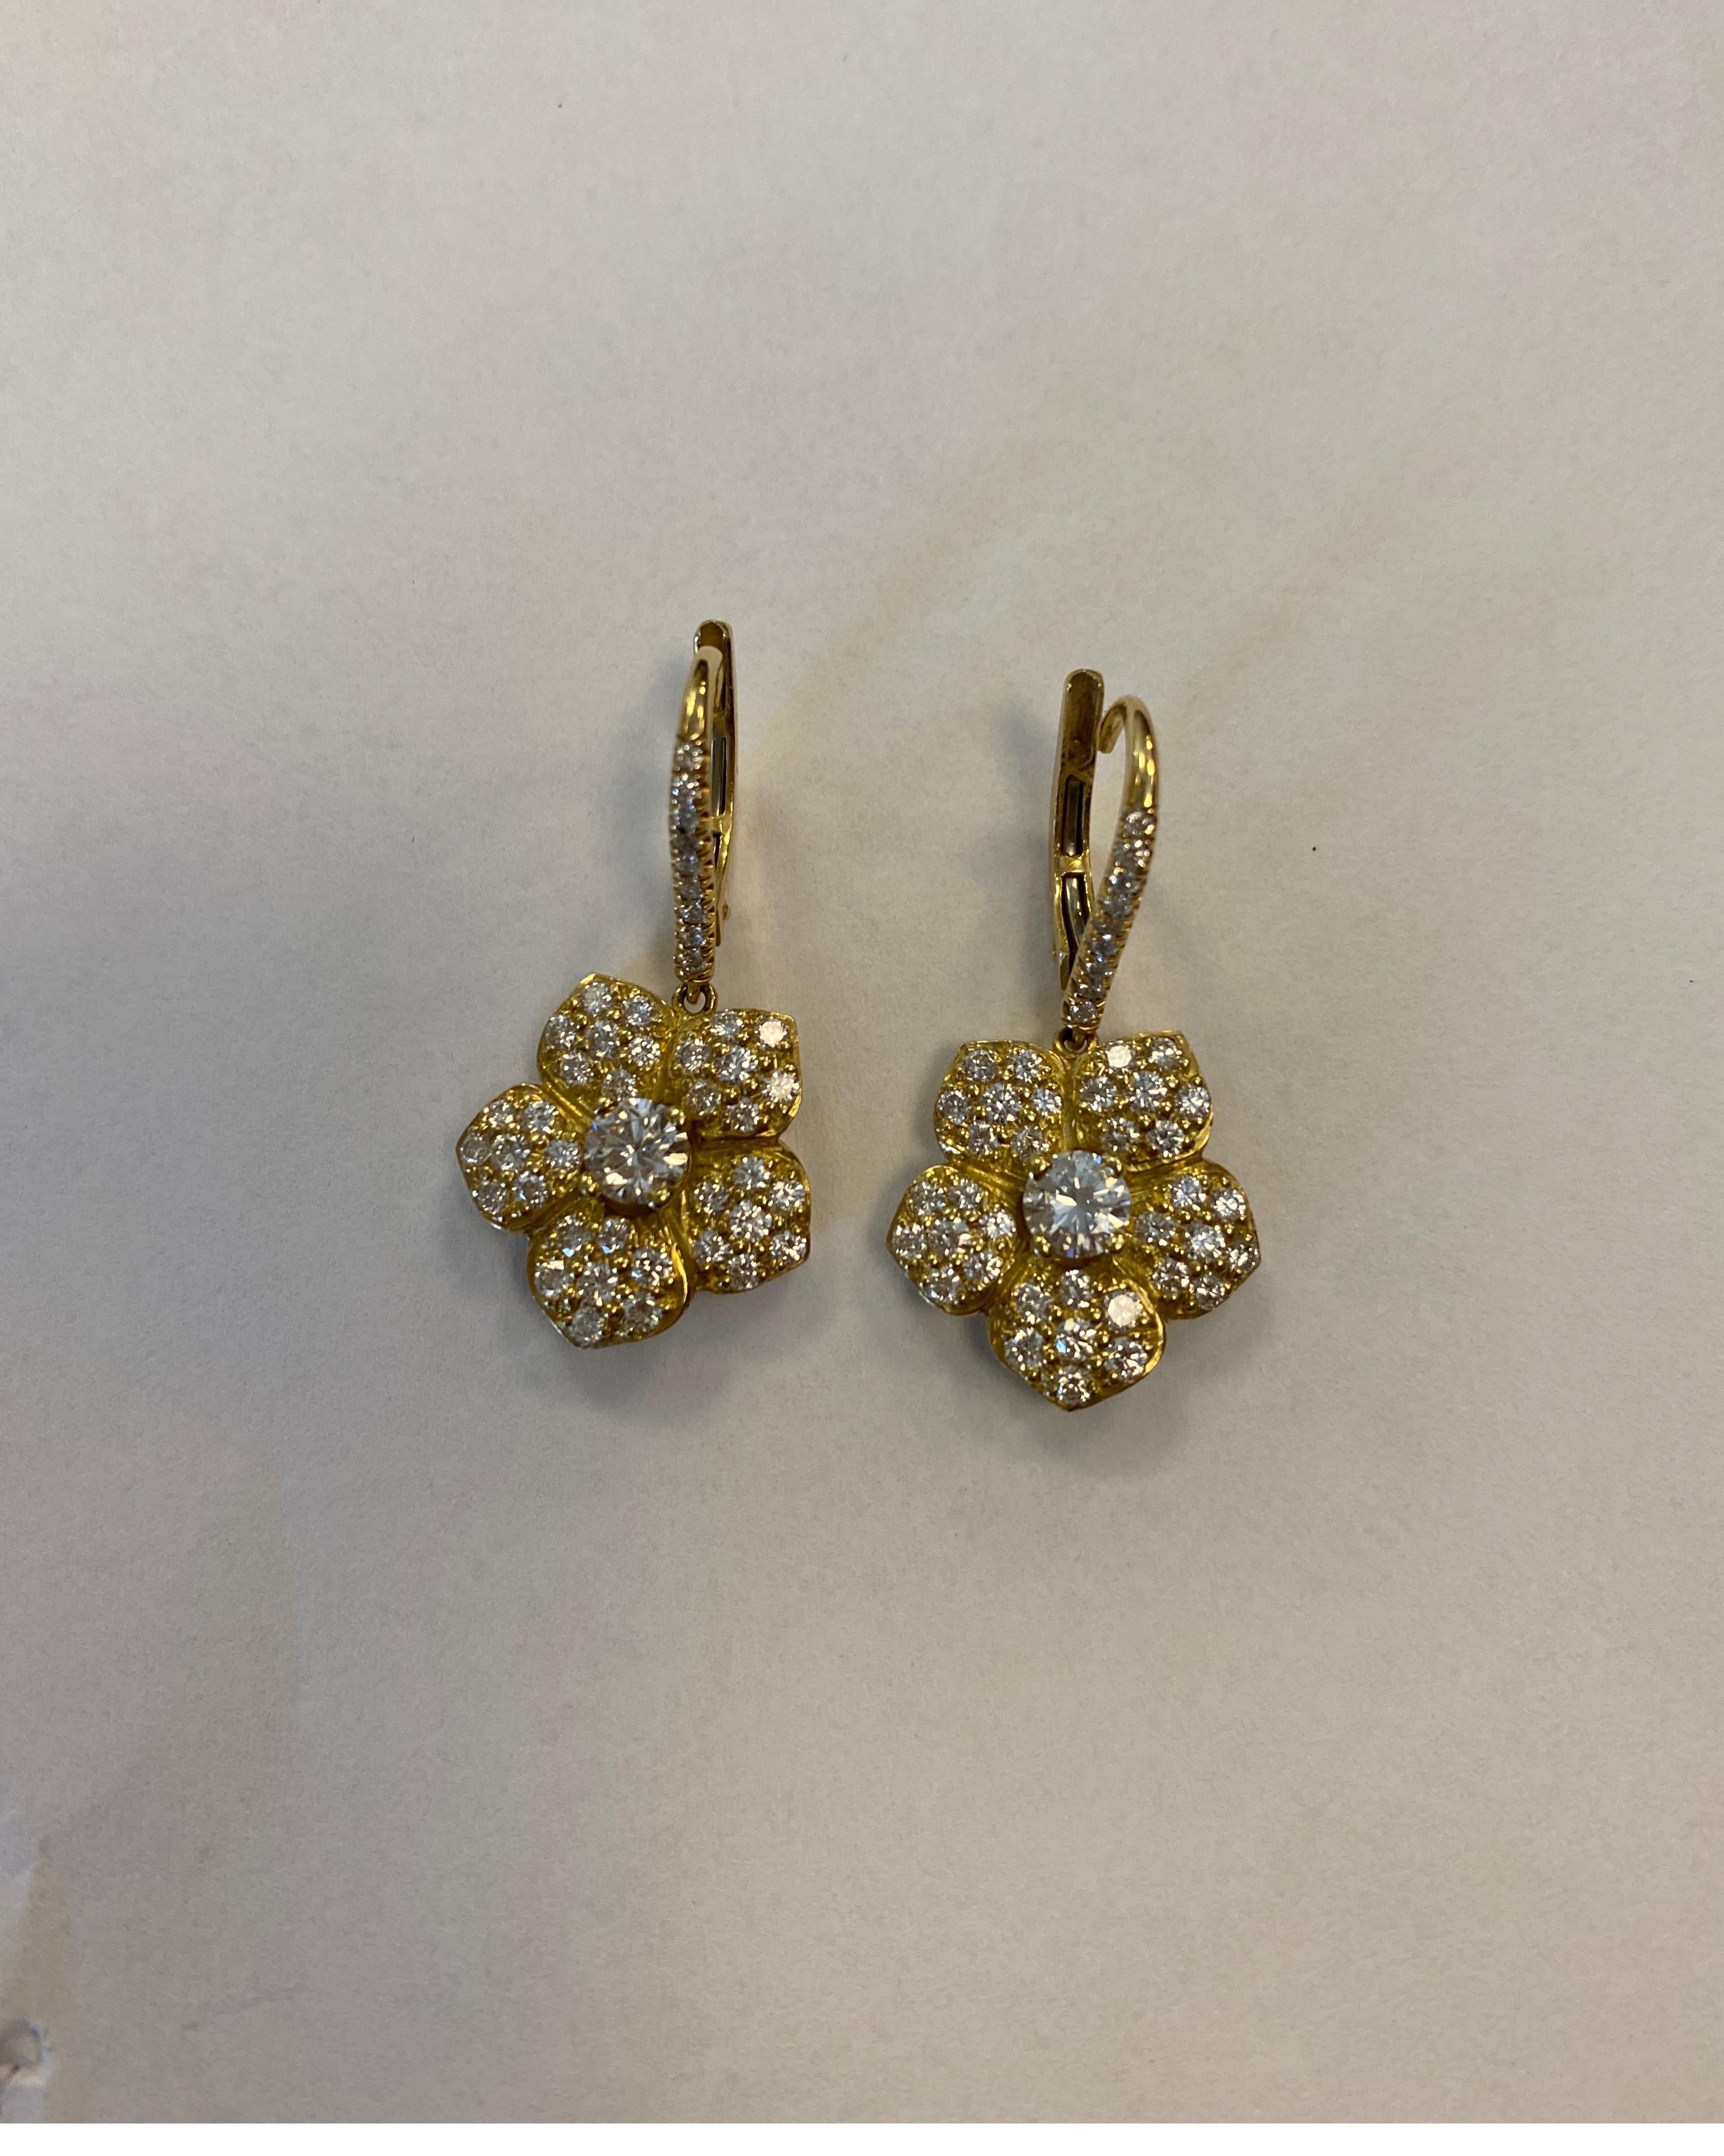 18K yellow gold diamond flower design drop earrings set with 90 full cut round diamonds weighing 1.89cts.
retail $6500 